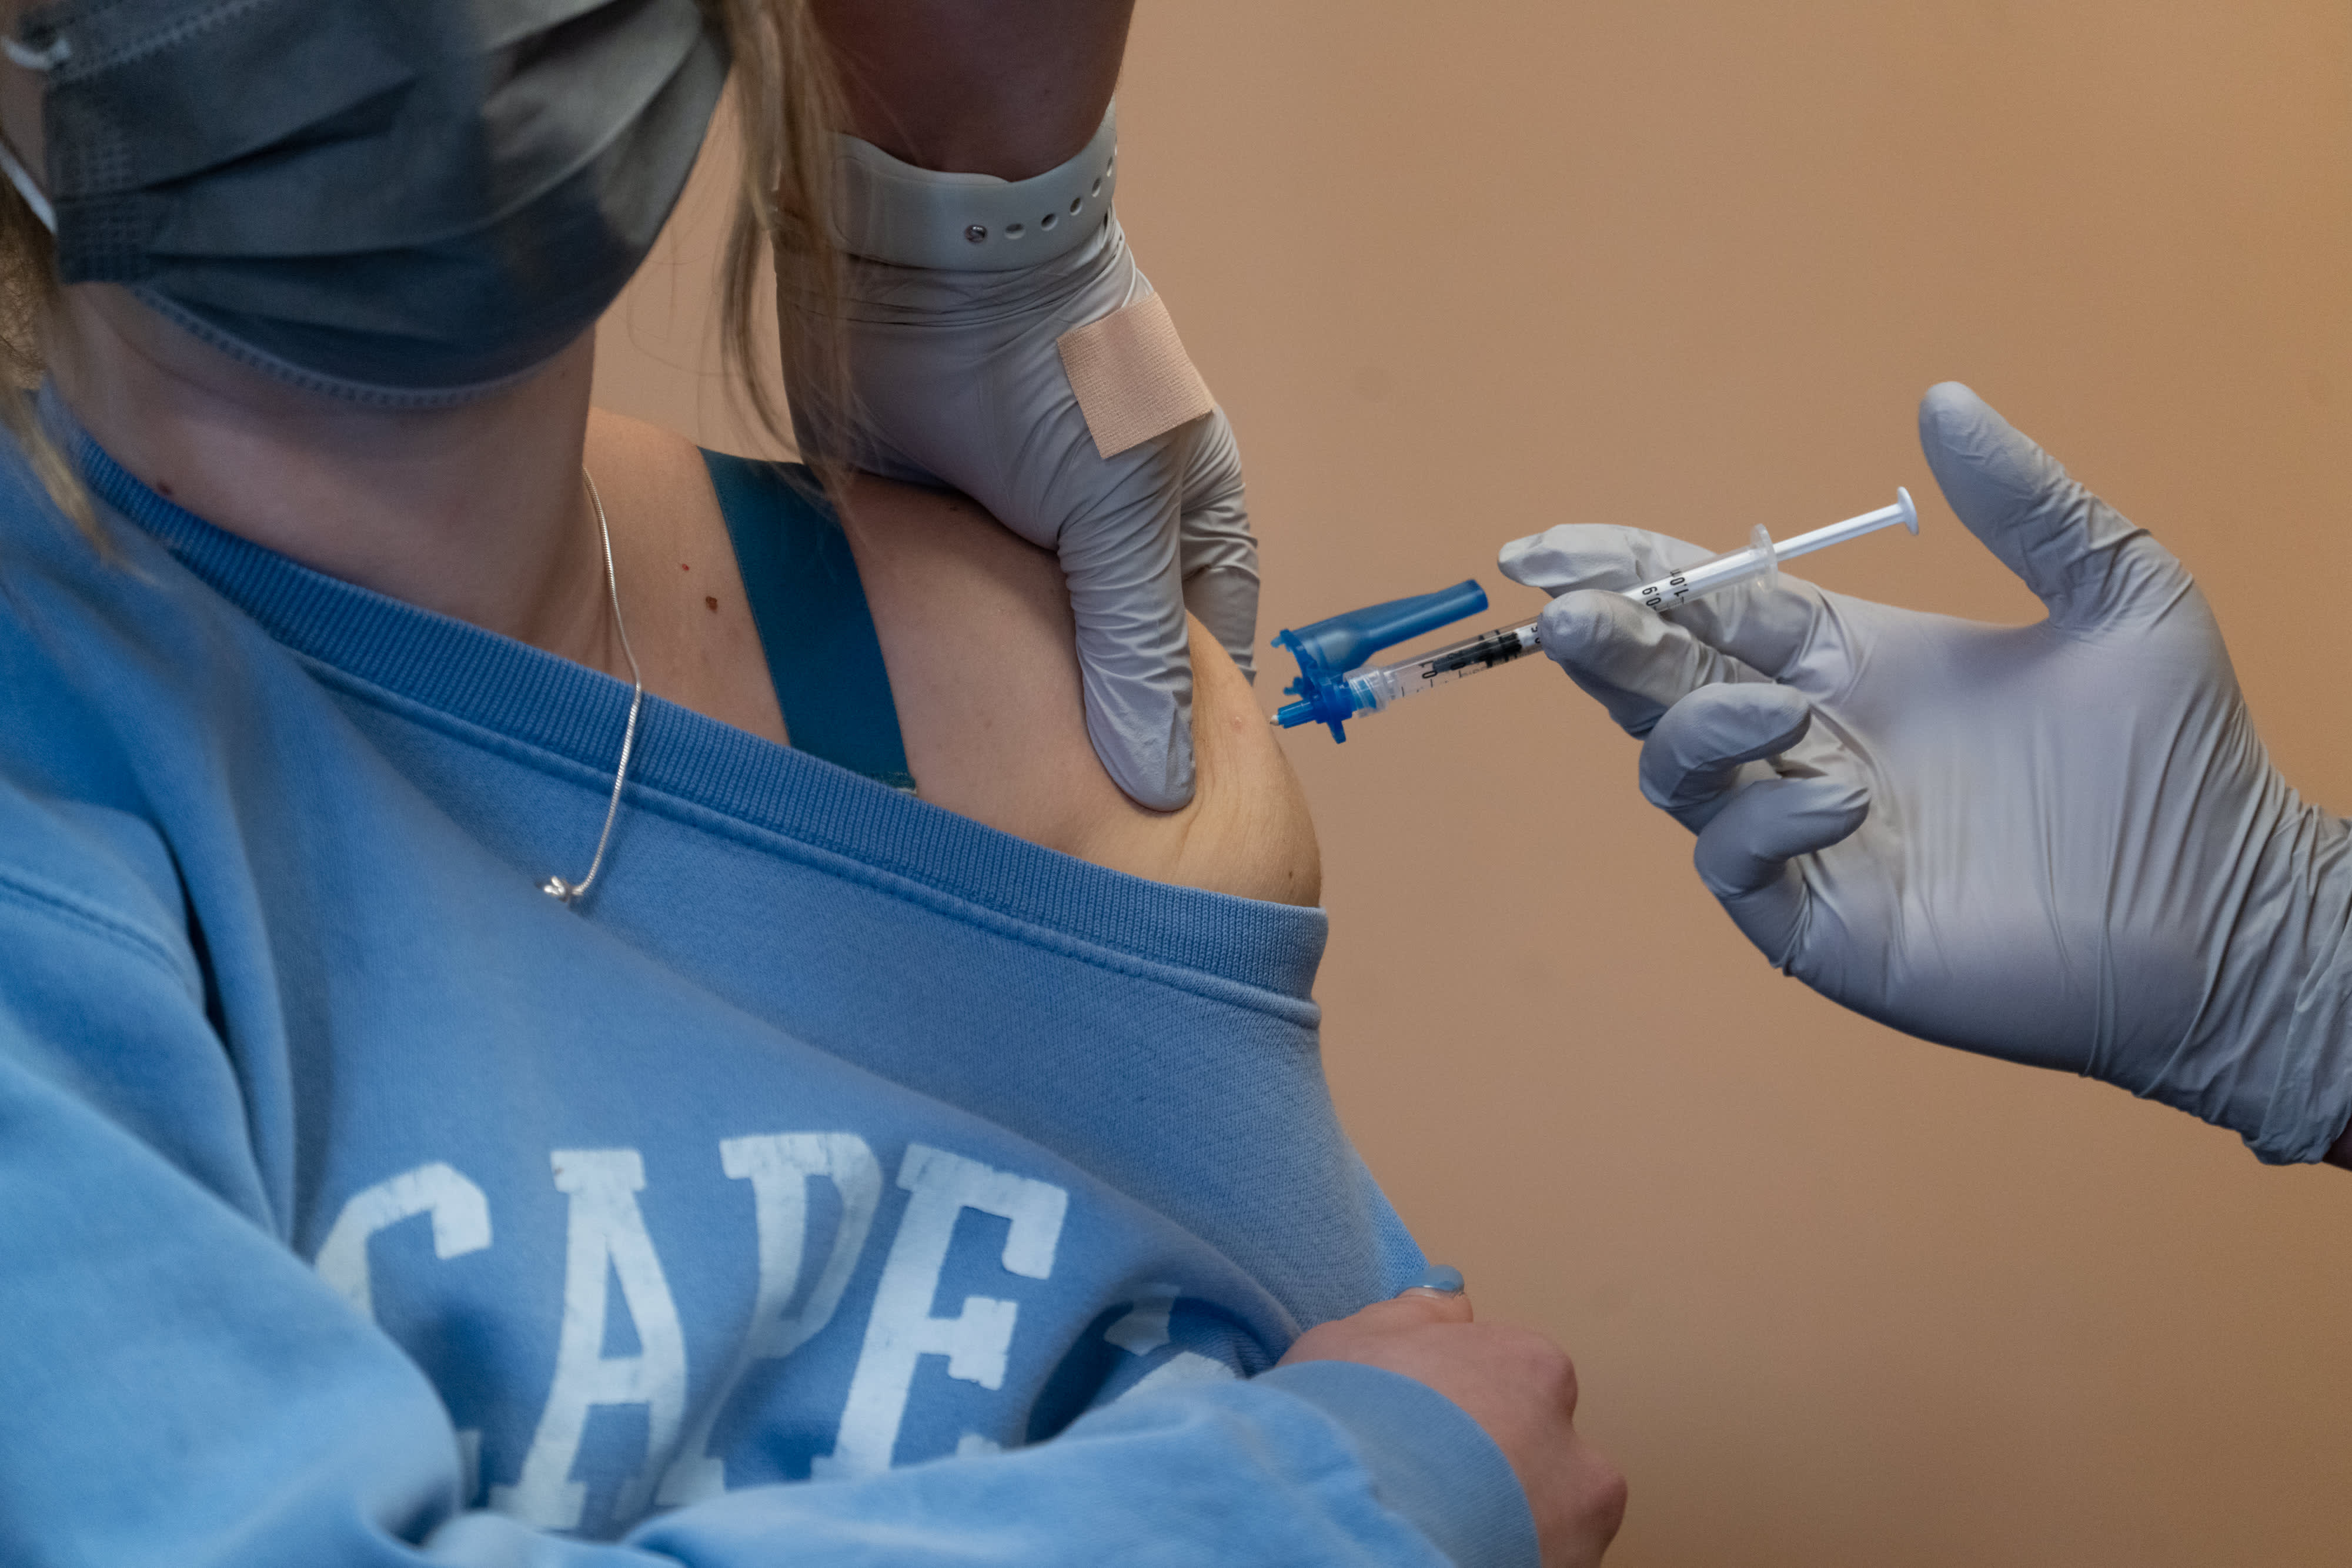 Covid Vaccination Linked to Slight Increase in Menstrual Cycle, NIH Study Confirms